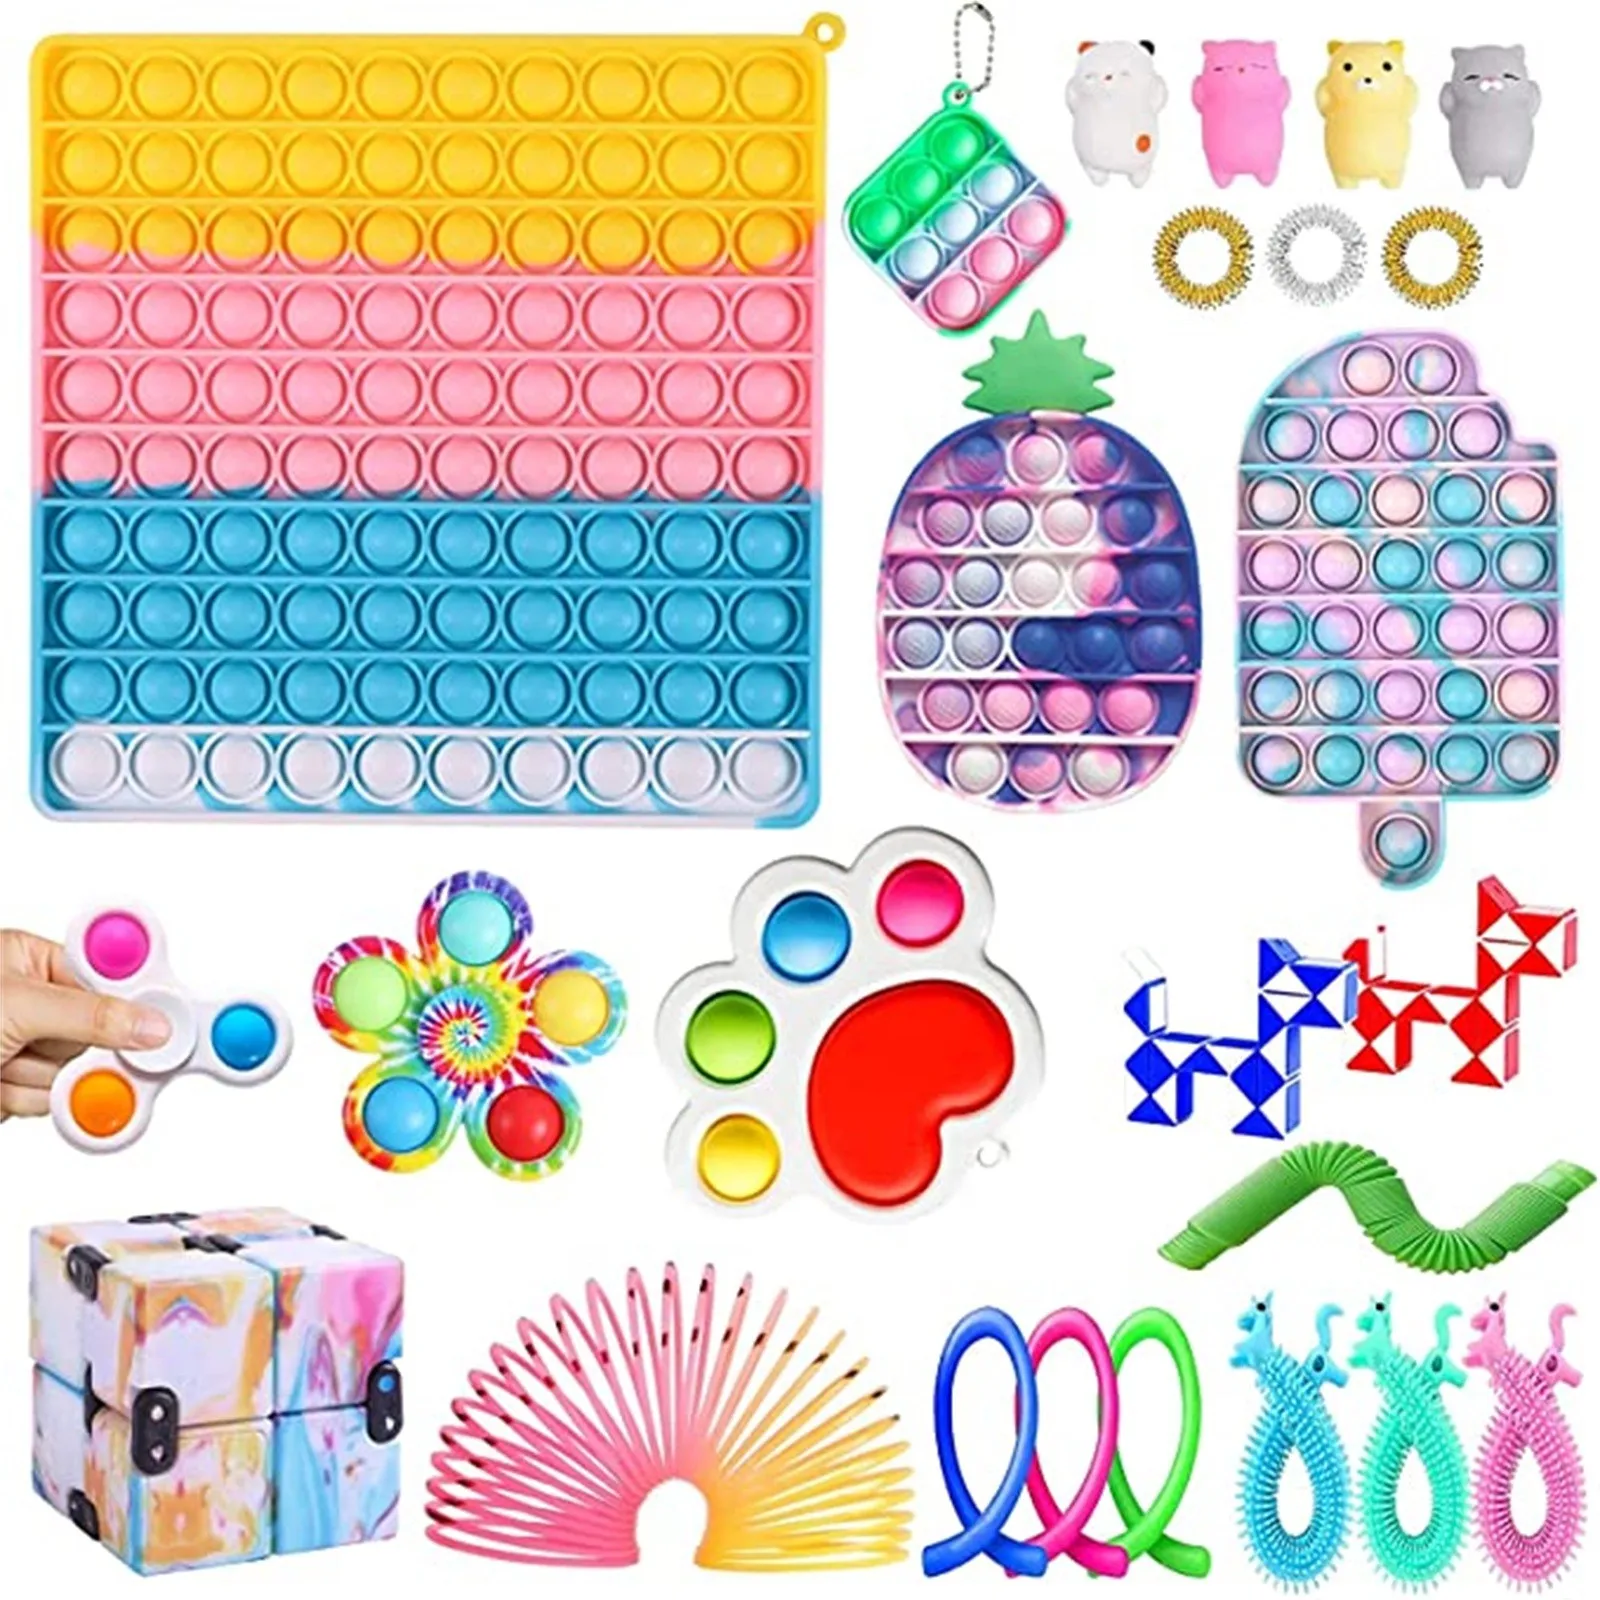 

Pack Adults Children Squishy Sensory Anti Stress Relief Figet Toys Kit Fidget Toys Antistress Toy Set Stretchy Strings Push Gift